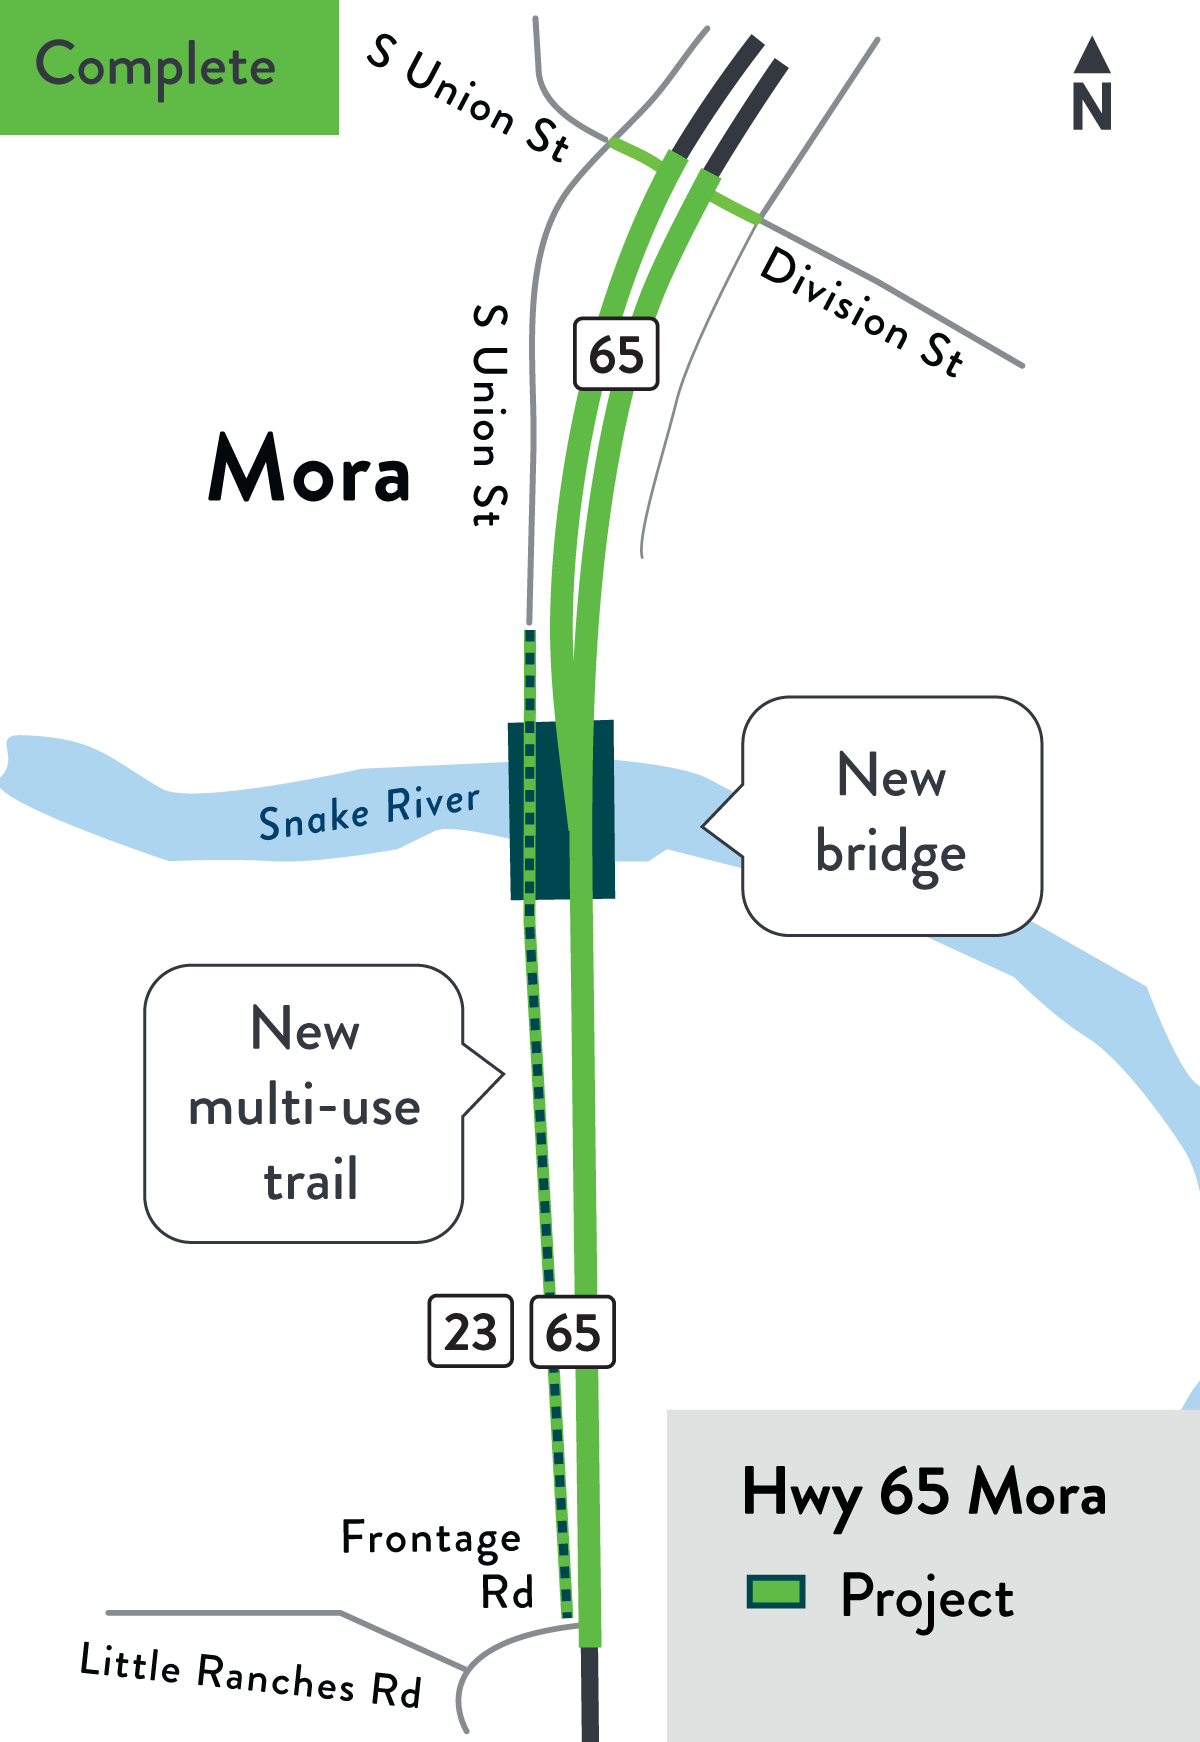 Hwy 65 project location map in Mora